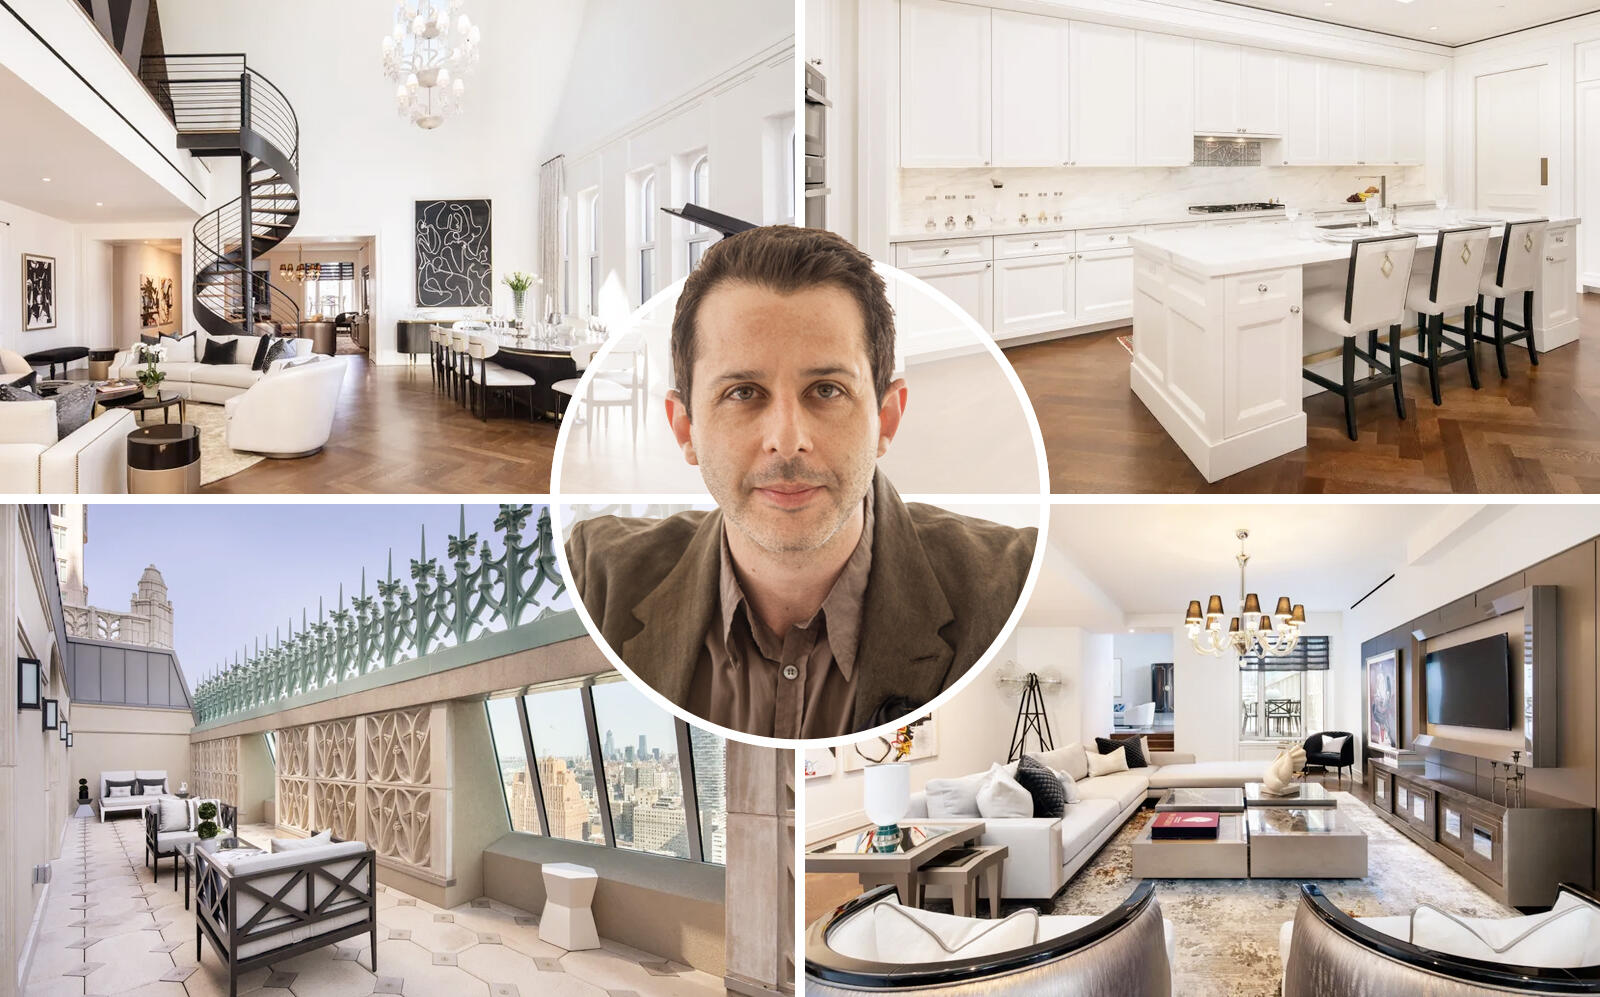 Succession star Jeremy Strong who plays Kendall Roy with the Tribeca condo (Sotheby's, Getty)